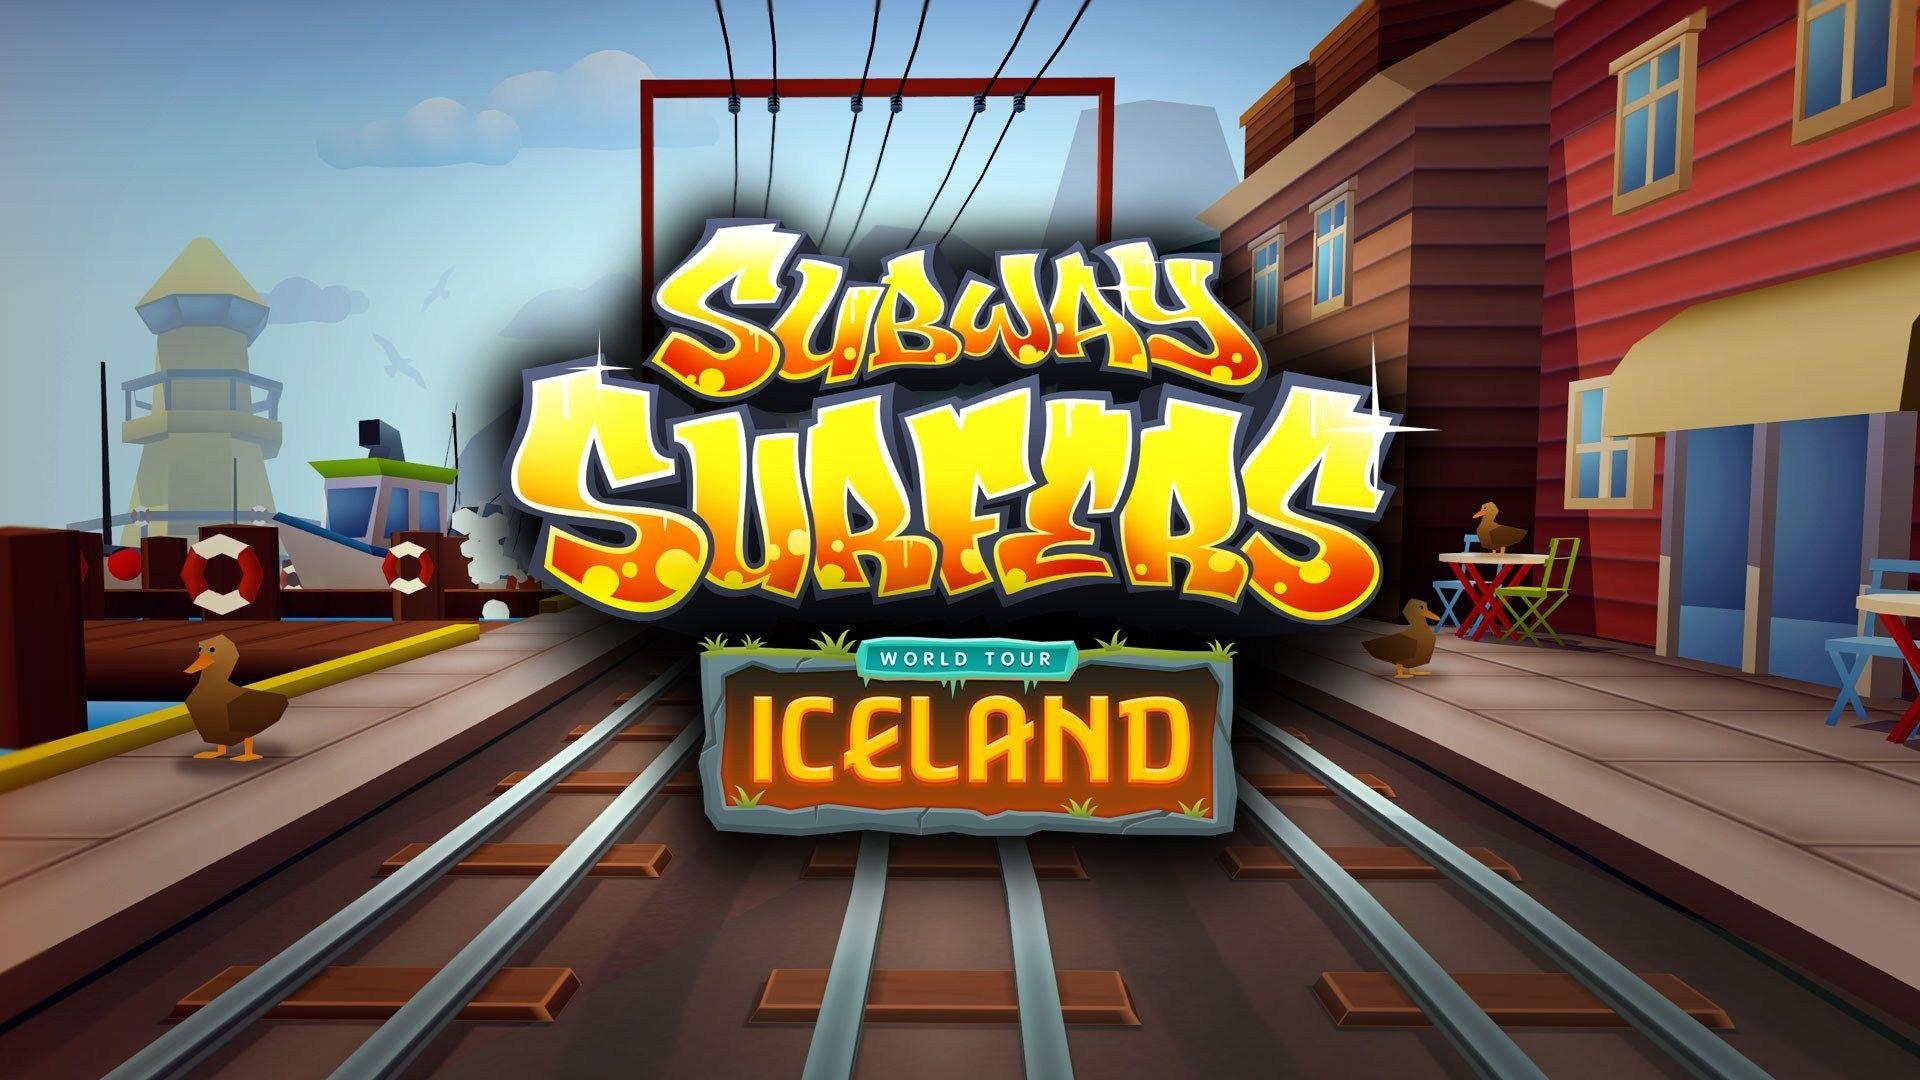 Join the Subway Surfers World Tour in beautiful Iceland